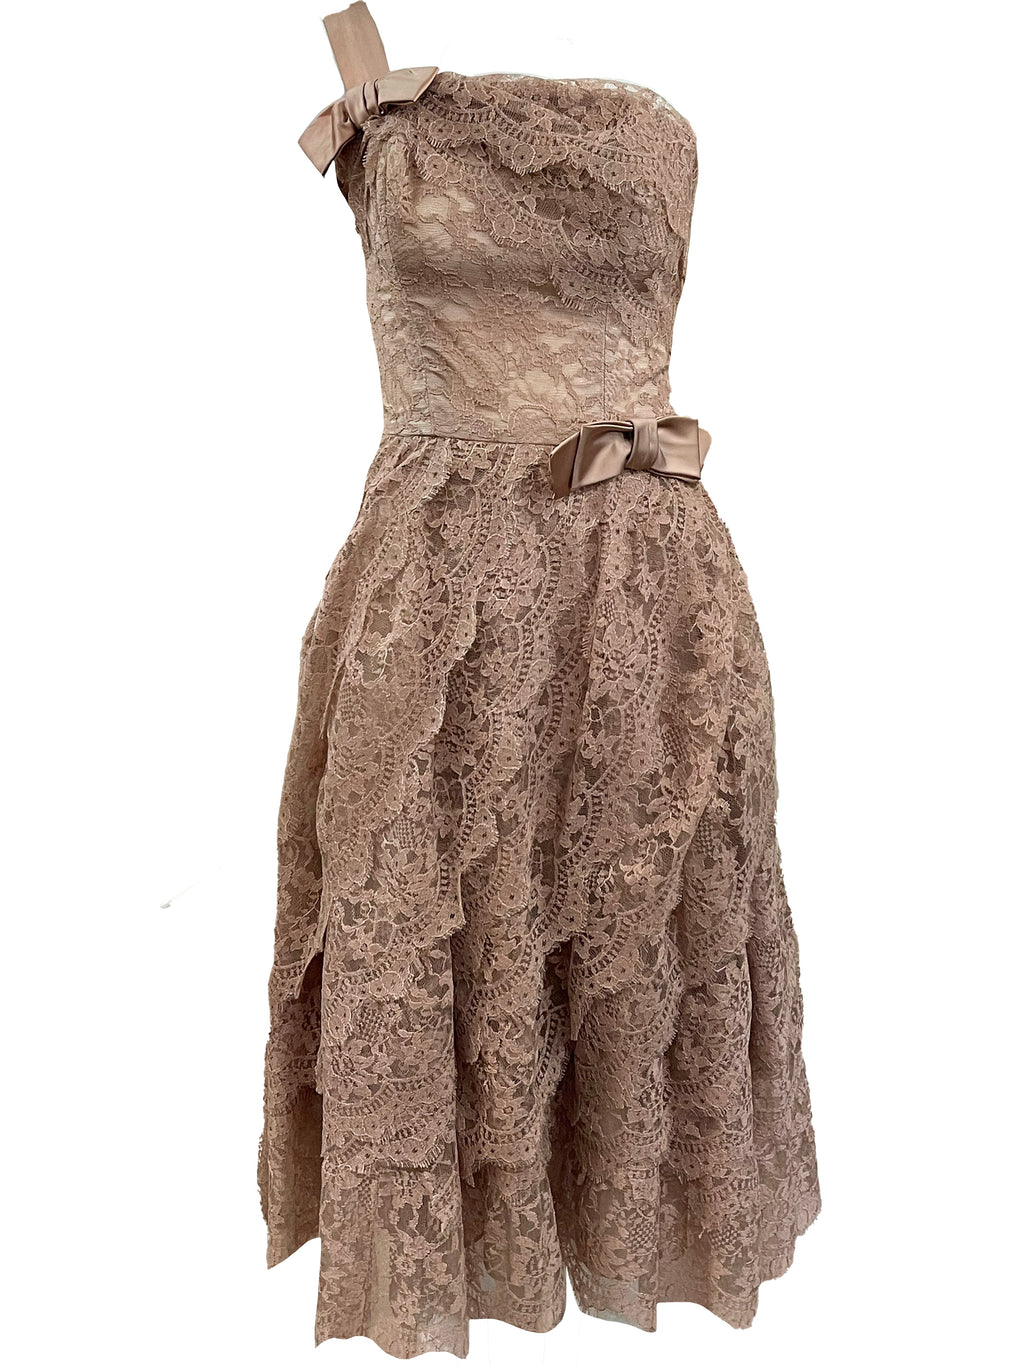 50s Mocha Brown Lace Cocktail Dress  FRONT 1 of 5